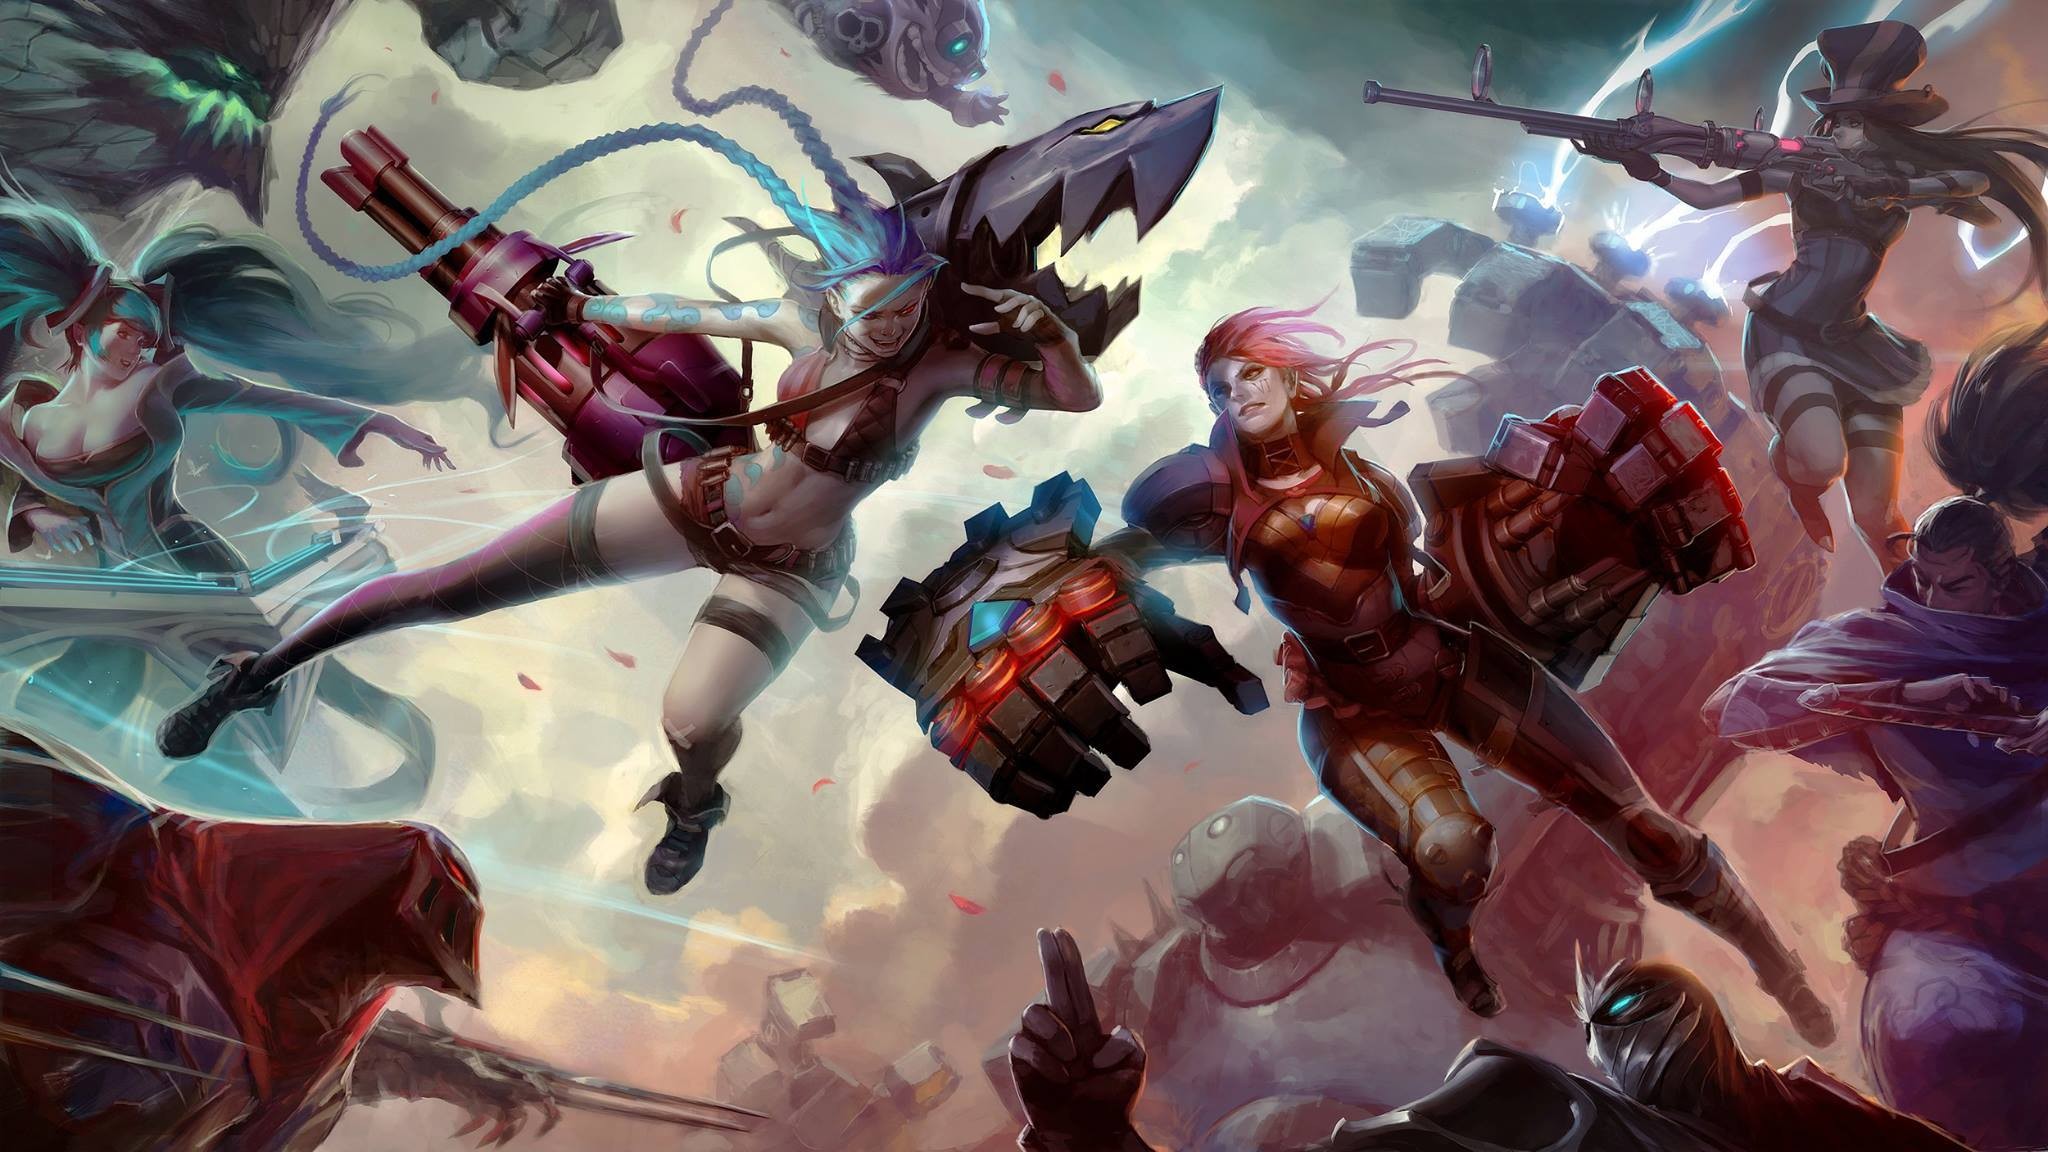 General 2048x1152 League of Legends Jinx (League of Legends) Sona (League of Legends) Vi (League of Legends) video game art video game girls PC gaming video game characters Ziggs (League of Legends) Malphite (League of Legends) Zed (League of Legends) Yasuo (League of Legends) Shen (League of Legends) Blitzcrank (League of Legends)